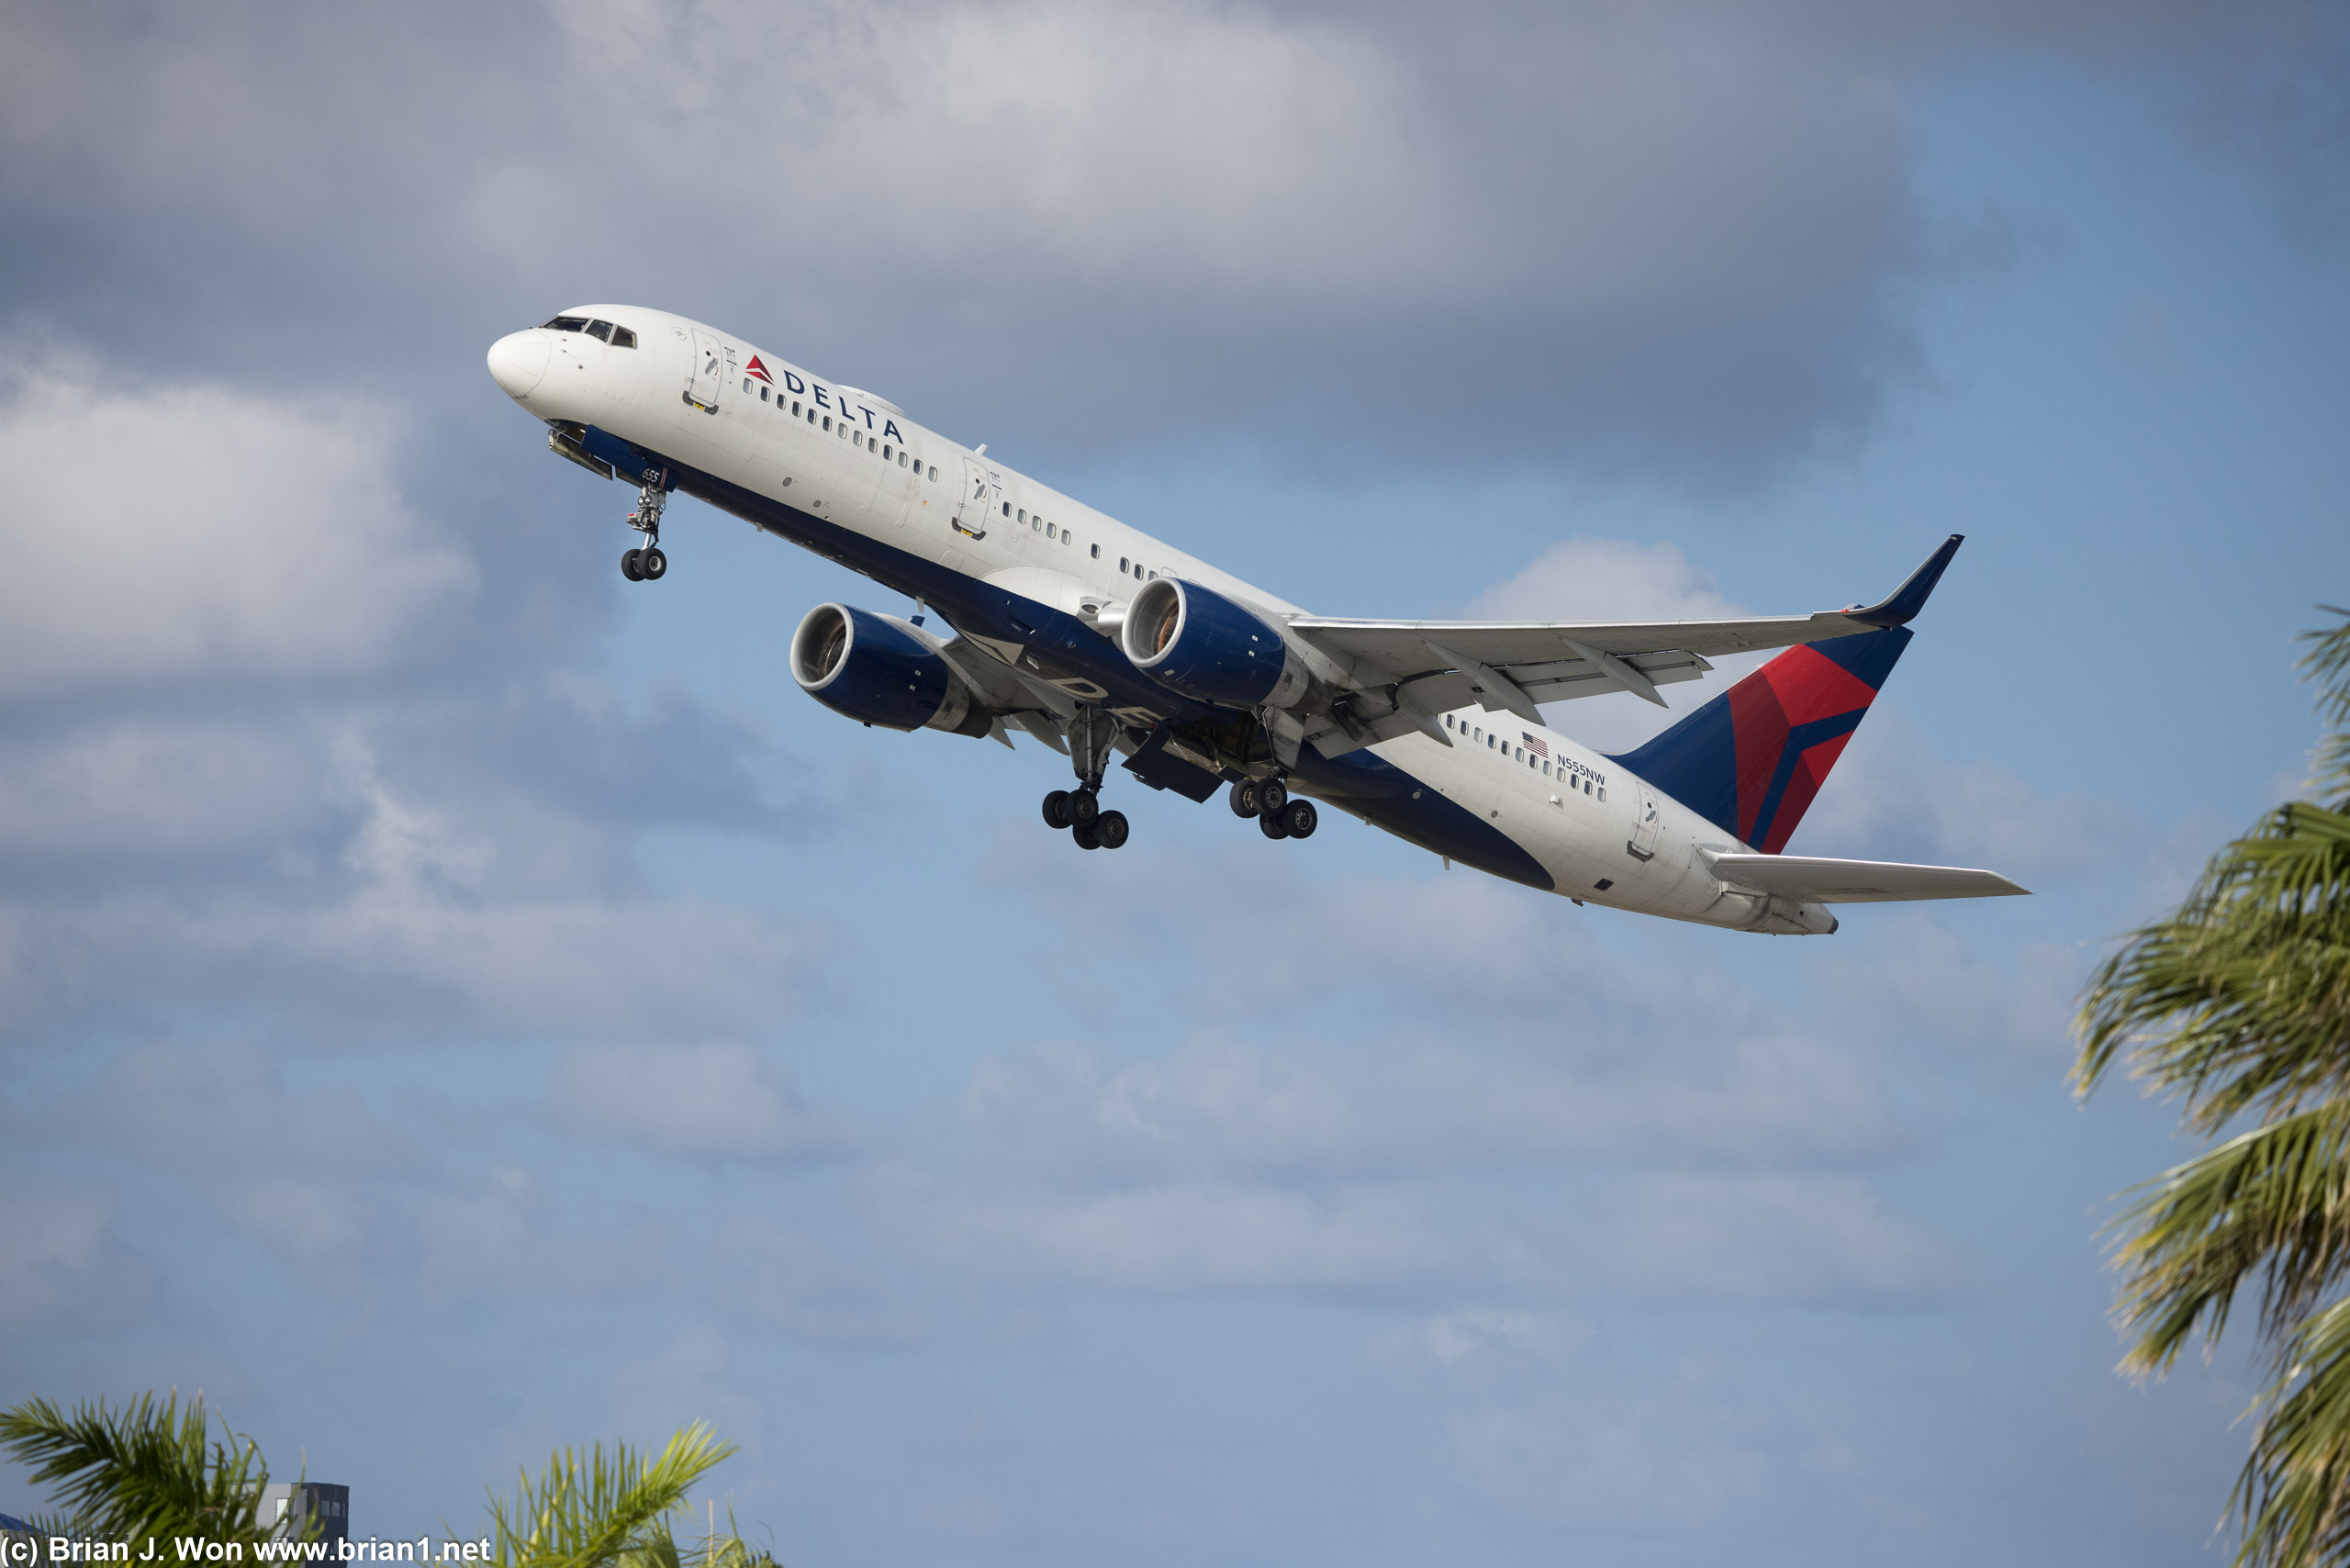 A different Delta 757-200 taking off.